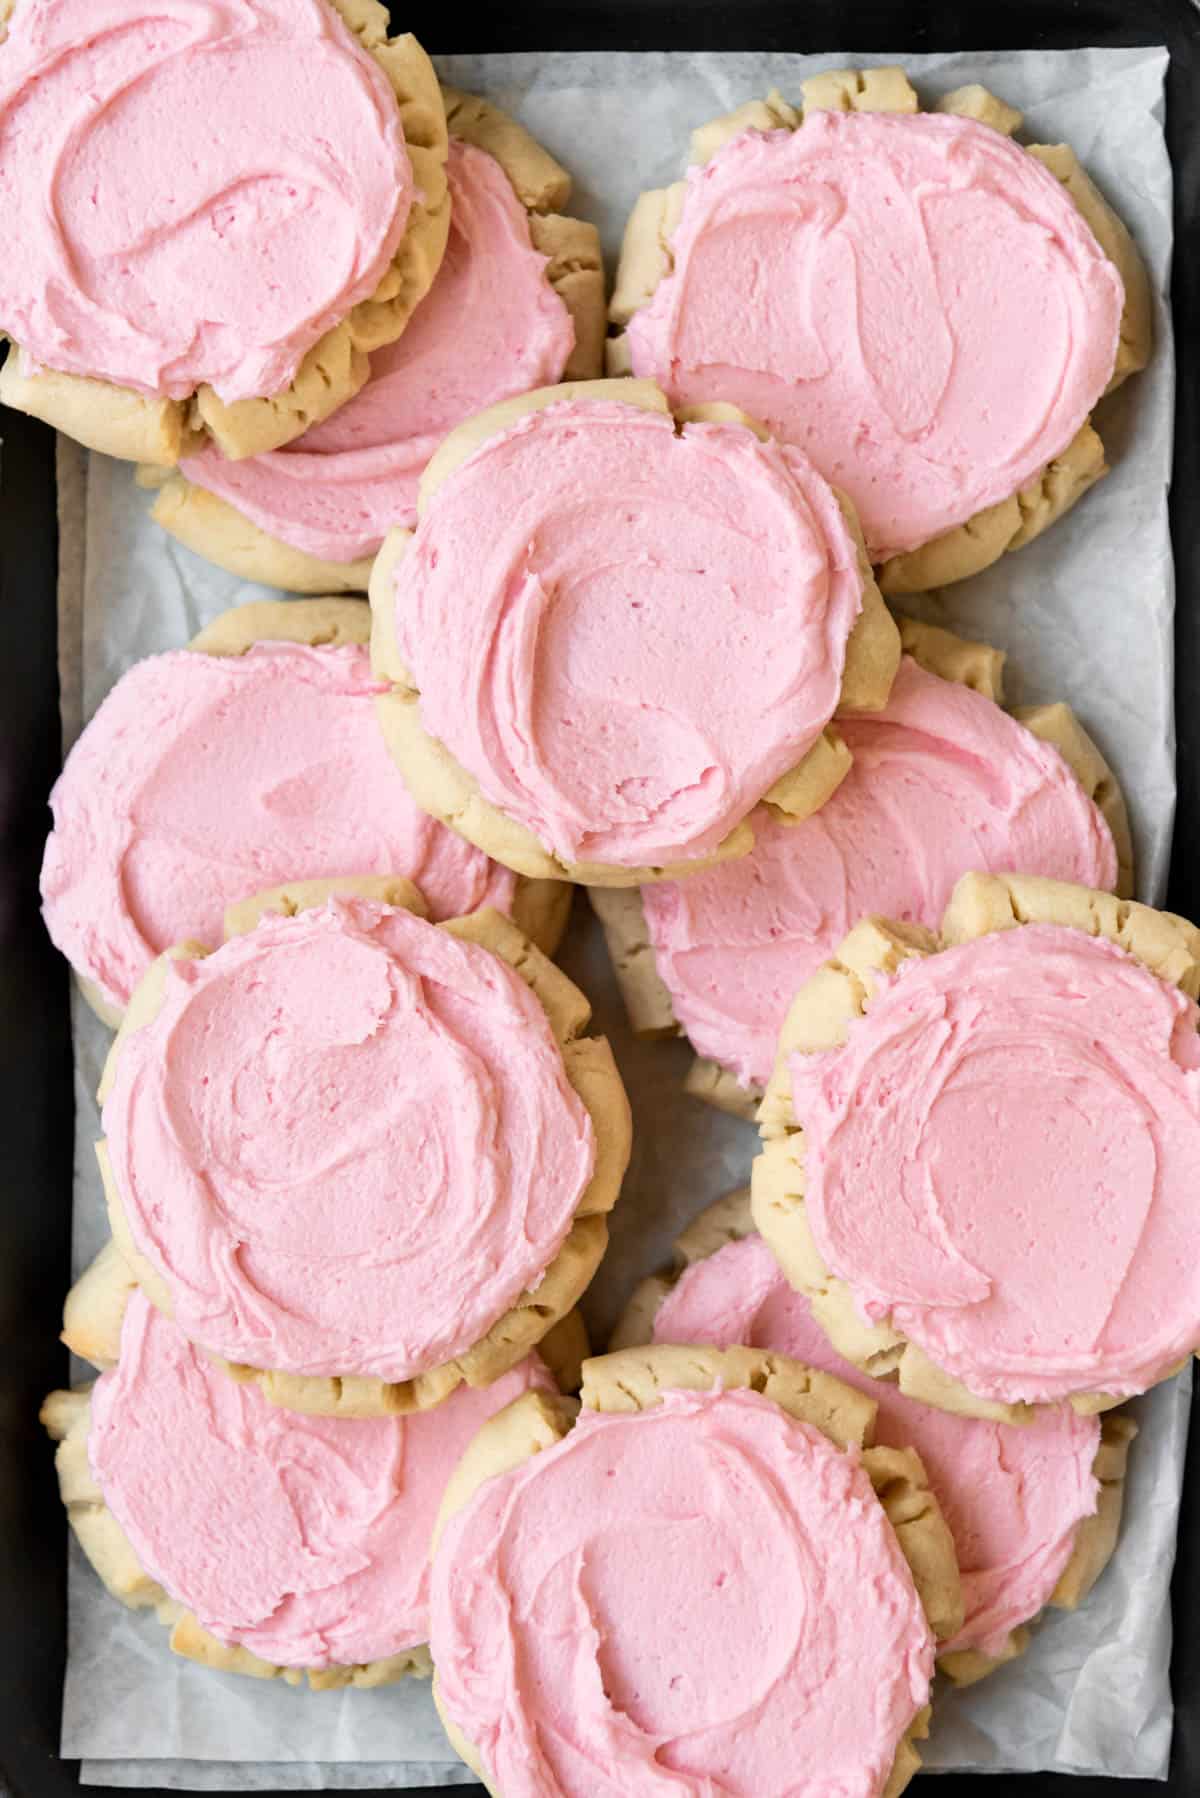 A close image of swirls of pink frosting on soft sugar cookies.